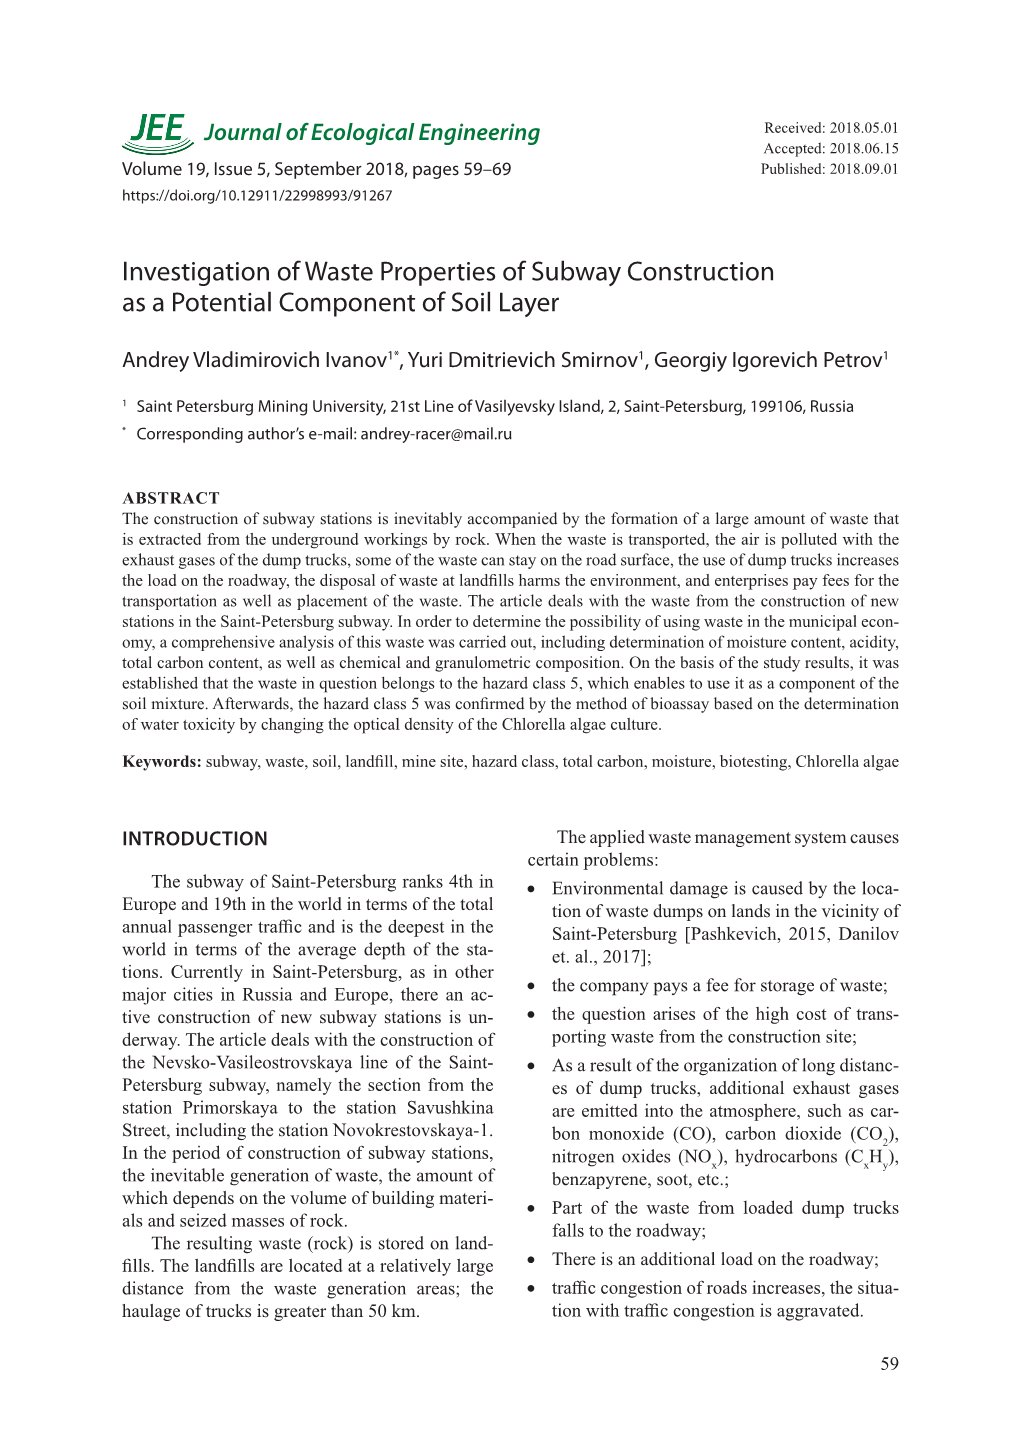 Investigation of Waste Properties of Subway Construction As a Potential Component of Soil Layer